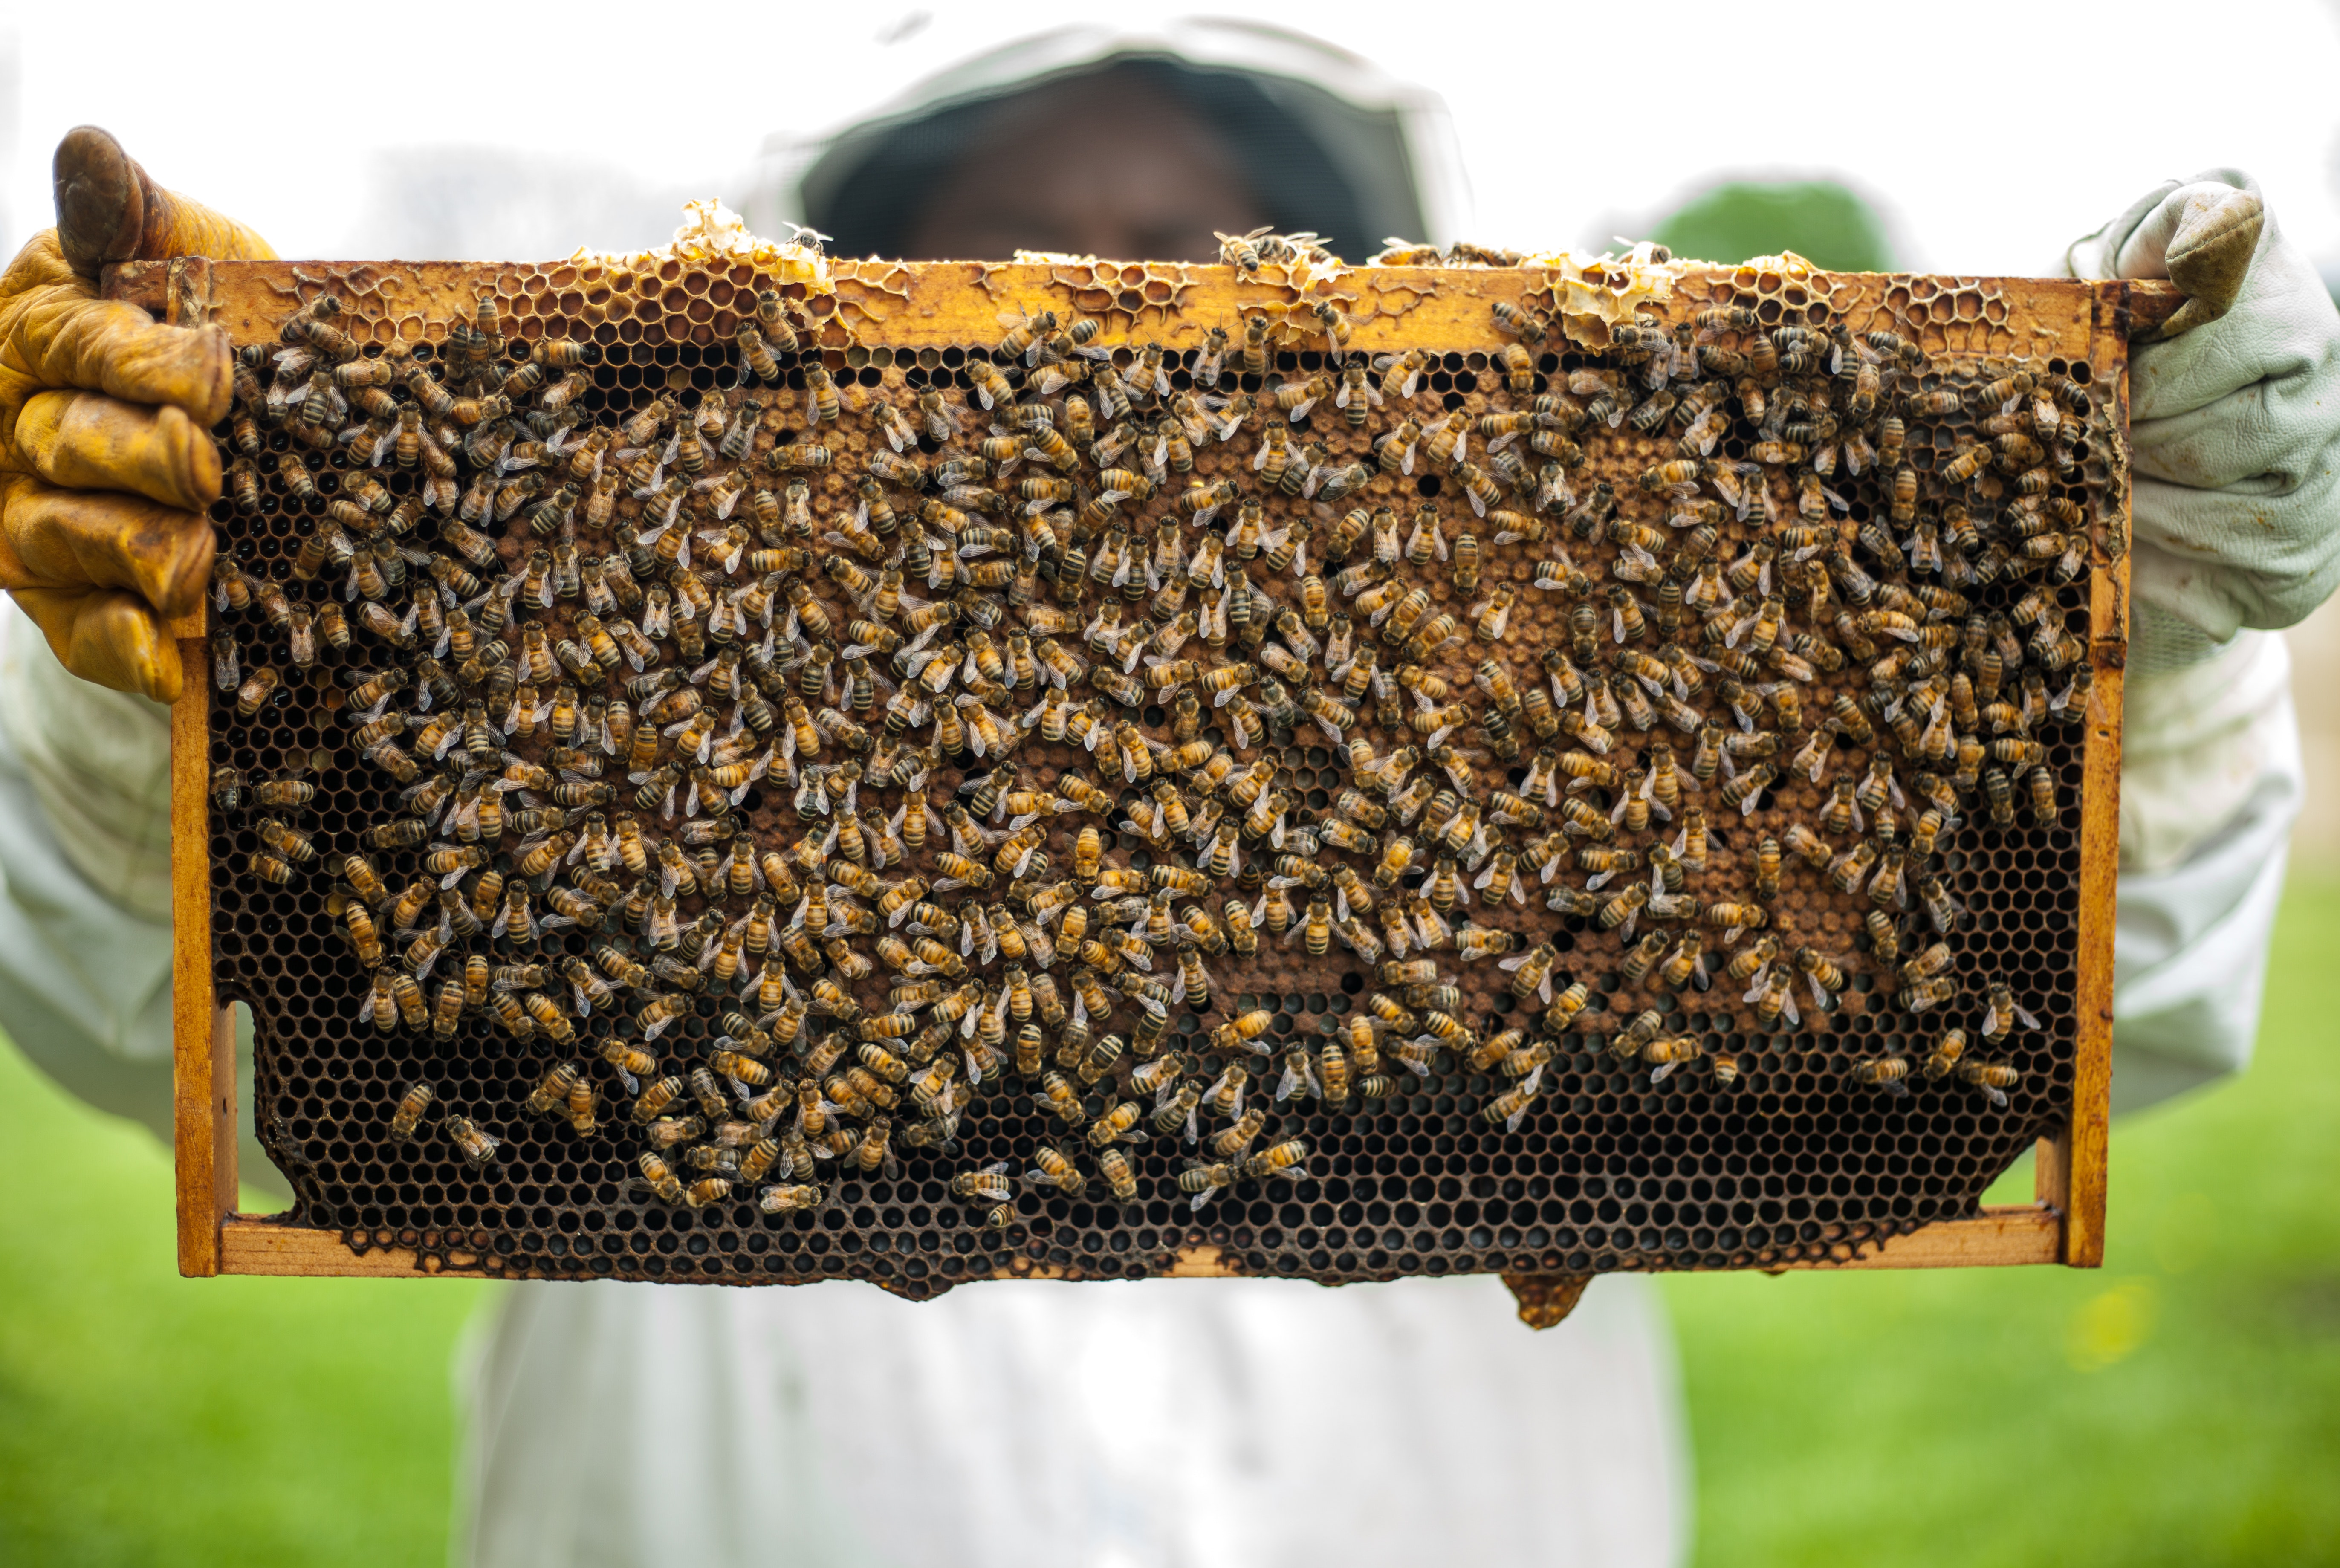 beekeeper holding honeycomb with bees